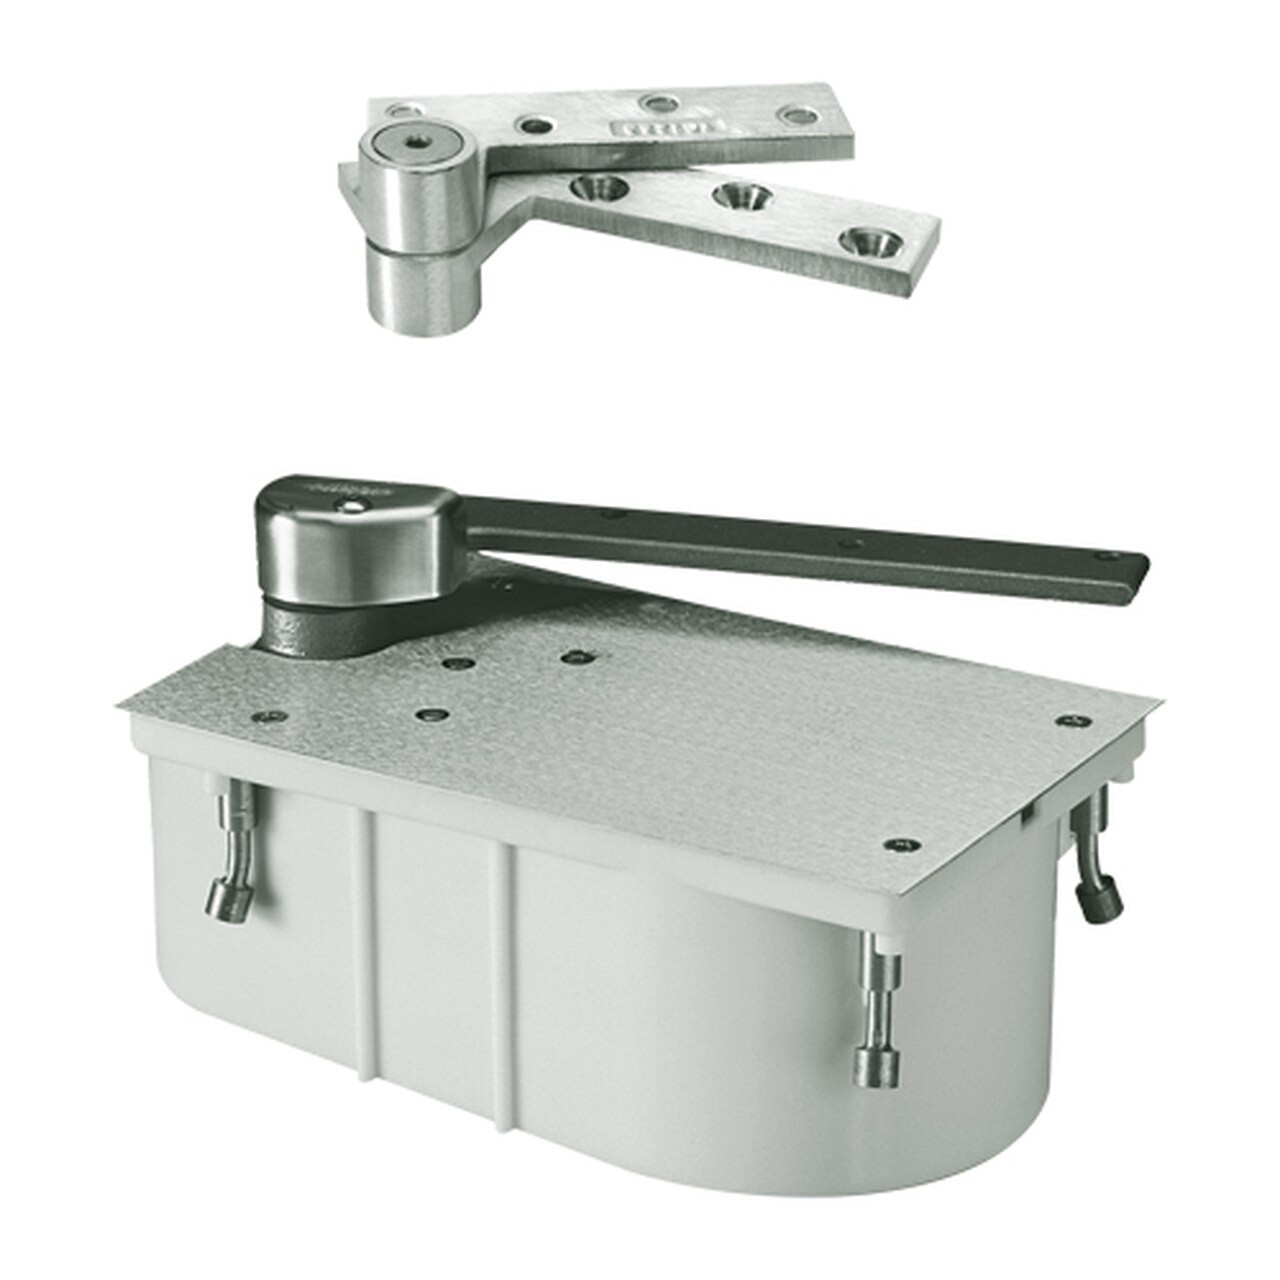 F27-90N-LTP-LH-619 Rixson 27 Series Fire Rated Heavy Duty 3/4" Offset Hung Floor Closer in Satin Nickel Finish